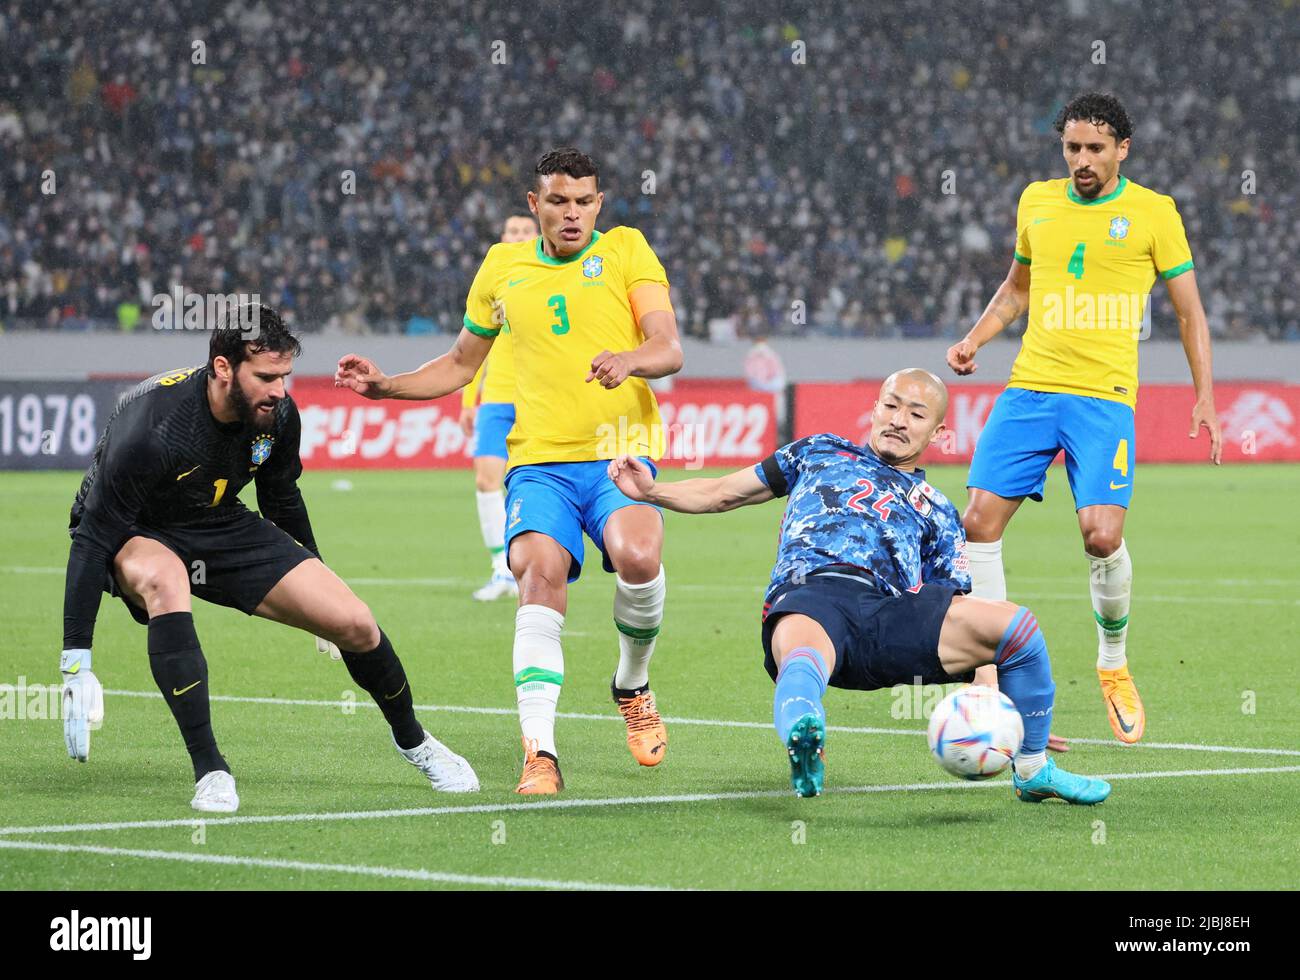 Tokyo, Japan. 6th June, 2022. Japan's Daizen Maeda (2nd R) fights the ball against Brazil's goalie Alisson (L), Thiago Silva (2nd L) and Marquinhos (R) during a friendly match 'Kirin Challenge Cup' between Brazil and Japan at the national stadium in Tokyo on Monday, June 6, 2022. Brazil defeated Japan 1-0 with a goal of Neymar's penalty kick. Credit: Yoshio Tsunoda/AFLO/Alamy Live News Stock Photo